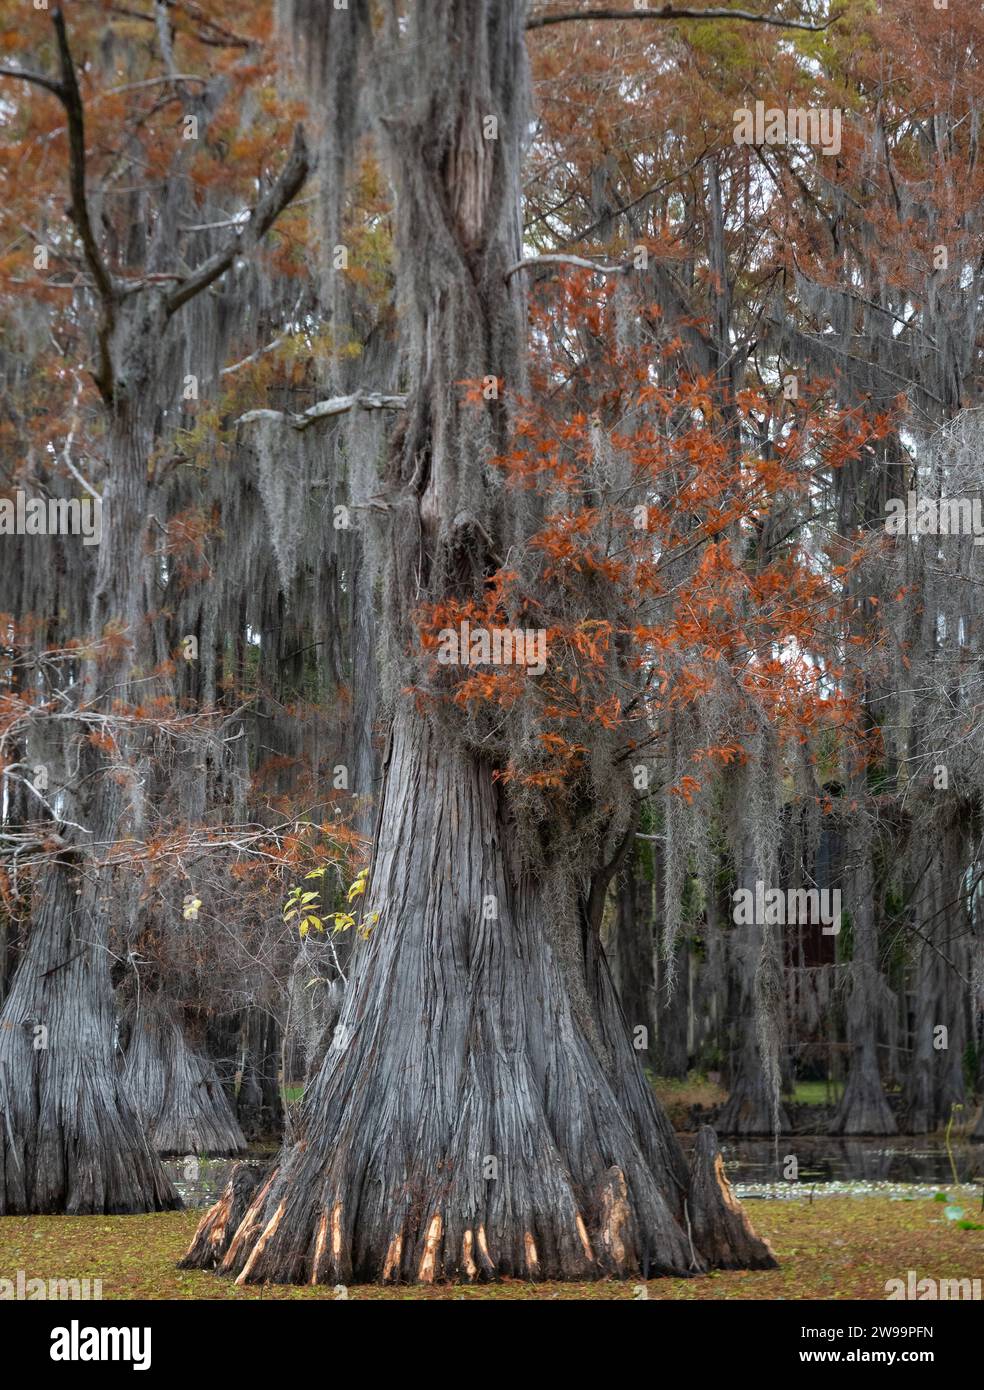 Massive bald cypress tree trunk with fall foliage and Spanish moss. Giant Salvinia, an invasive species, is in the water surrounding the tree. Stock Photo